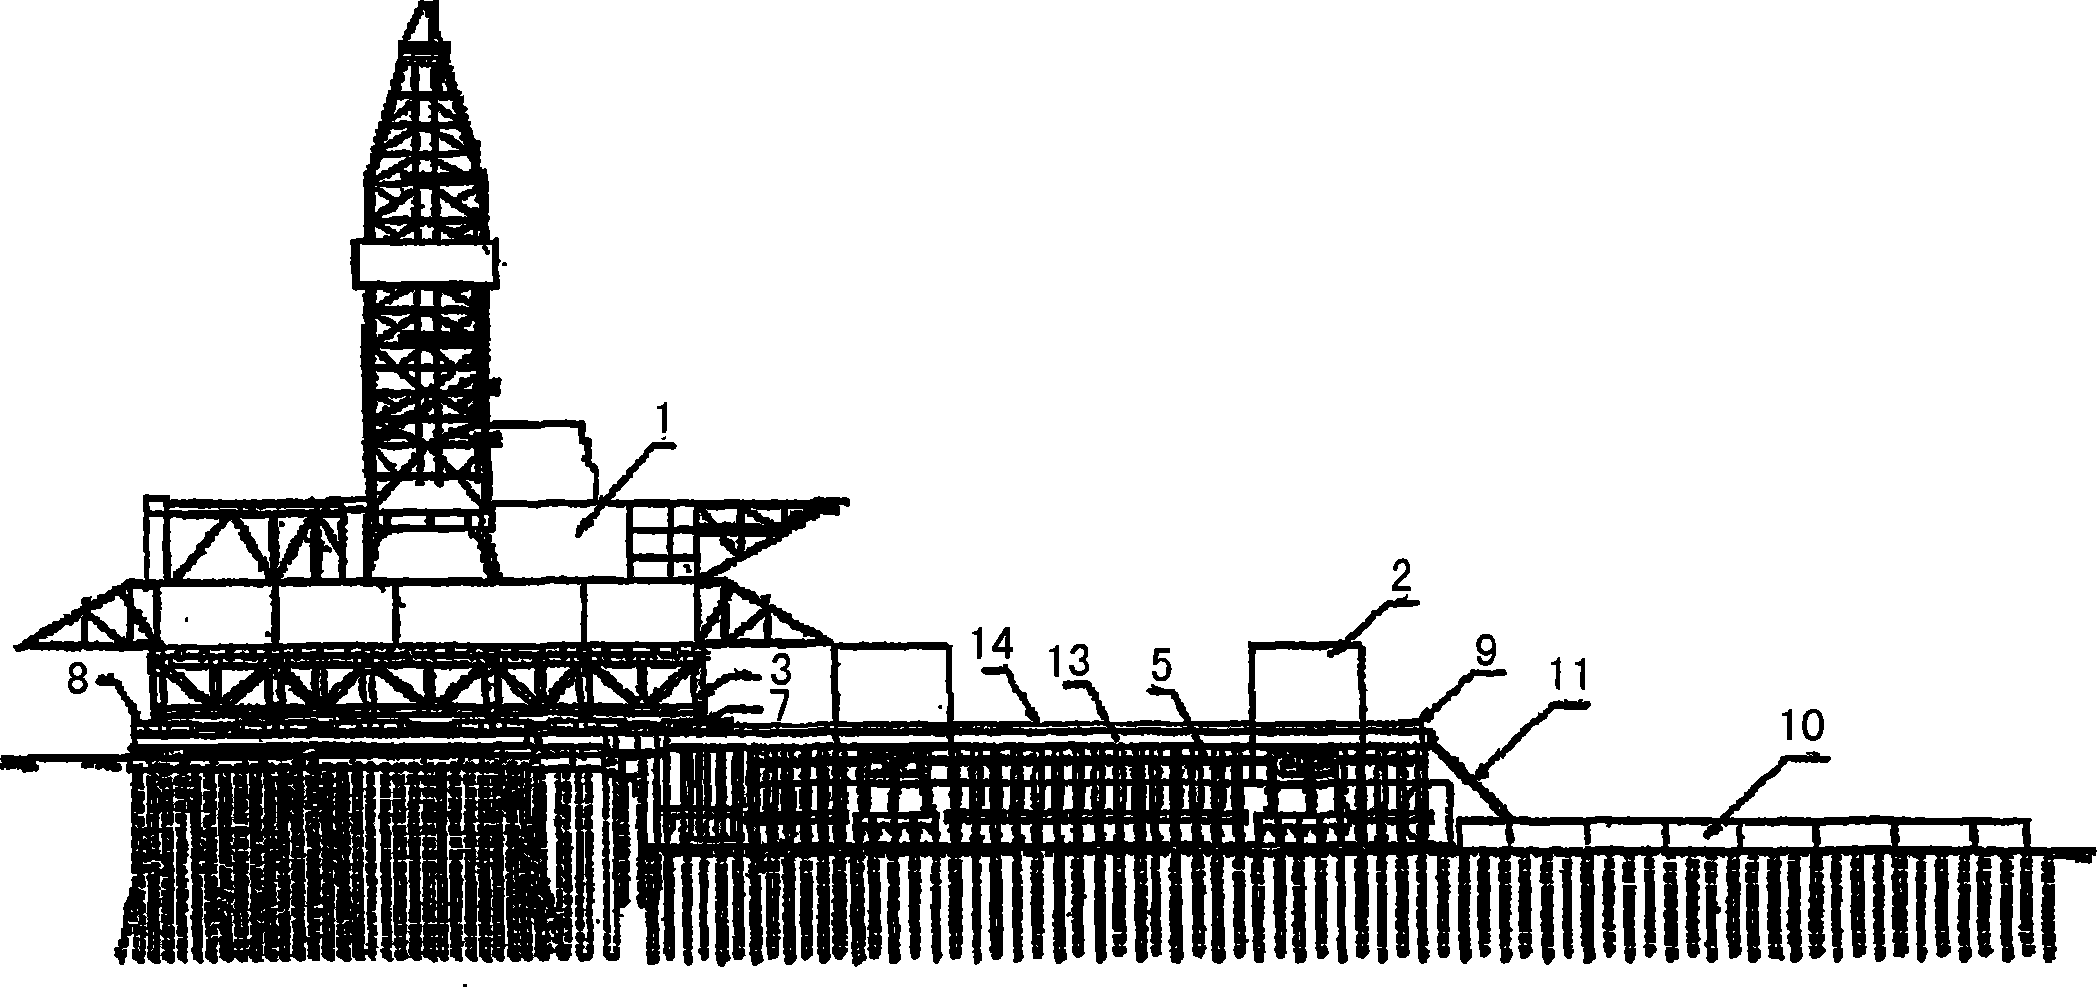 A method of constructing a semi-submersible vessel using dry dock mating